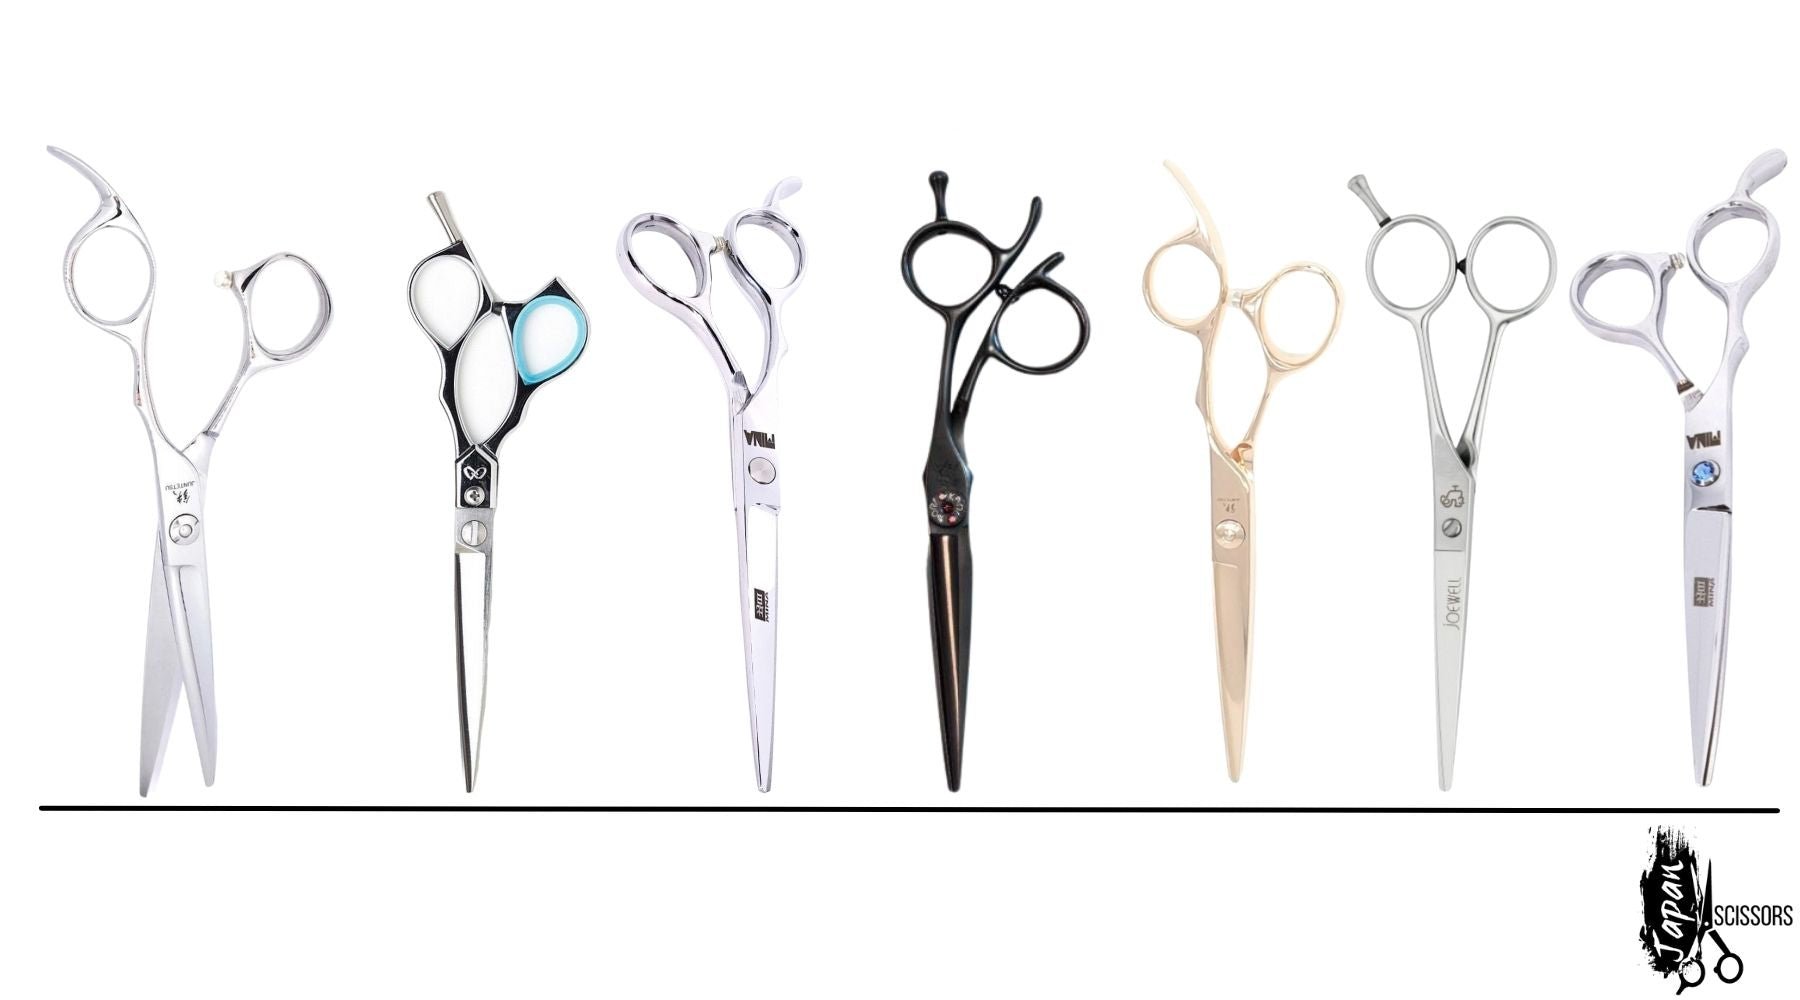 The Top 10 Hair Cutting Shears For American Hairstylists - Japan Scissors USA